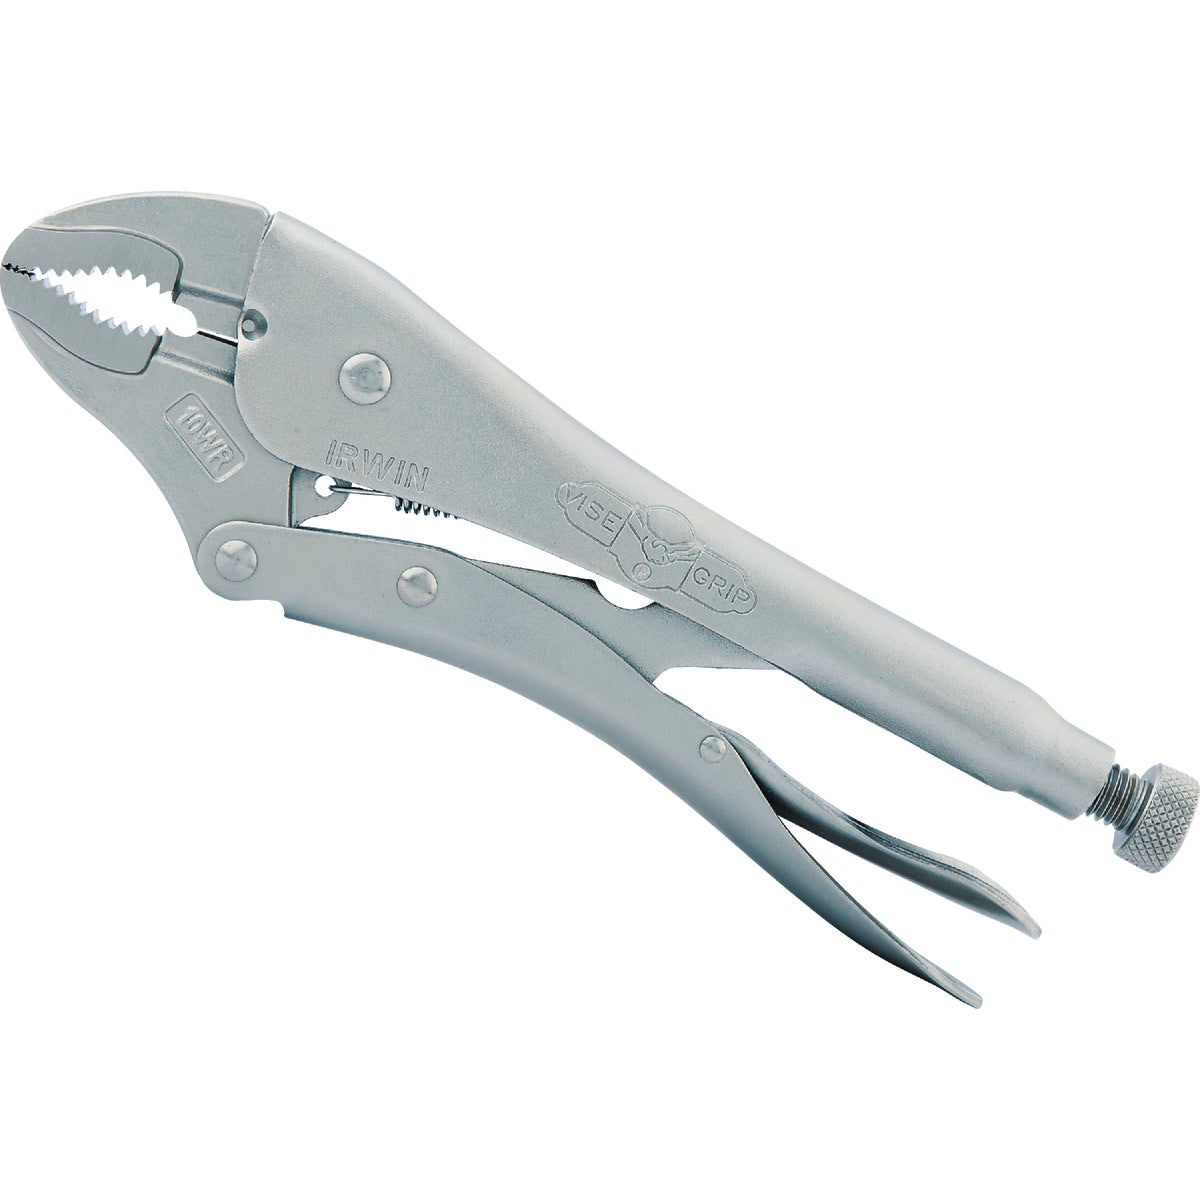 Locking pliers (vise grips) preferences : r/Tools